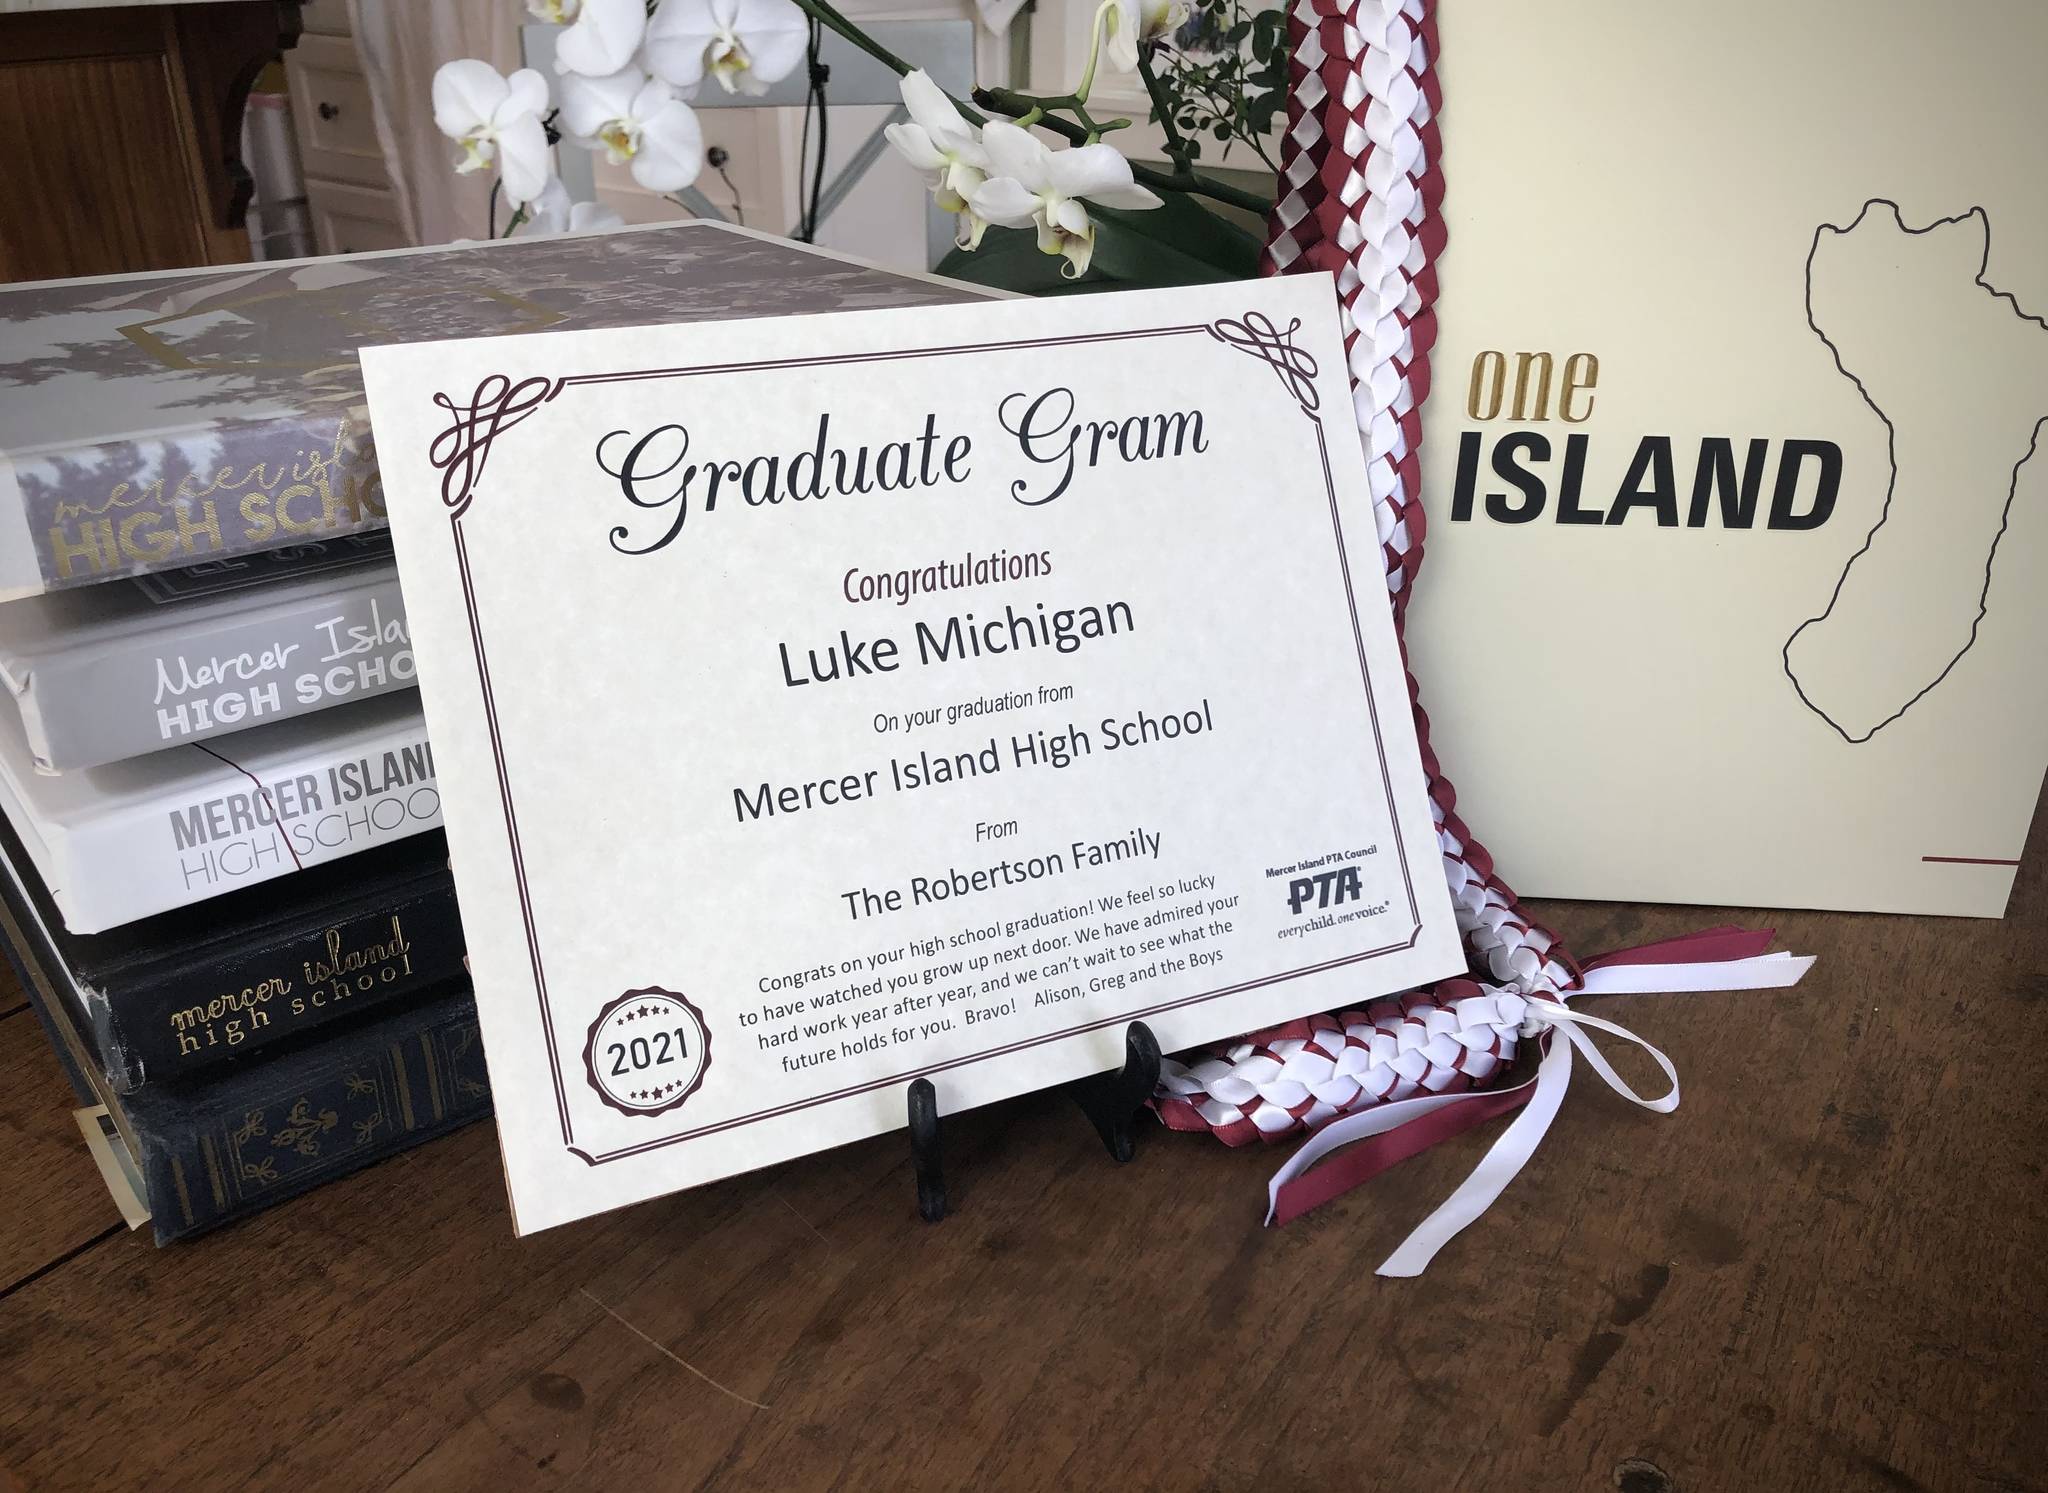 Pictured is a fictitious example of a Mercer Island Grad Gram. Photo courtesy of the Mercer Island PTA Council